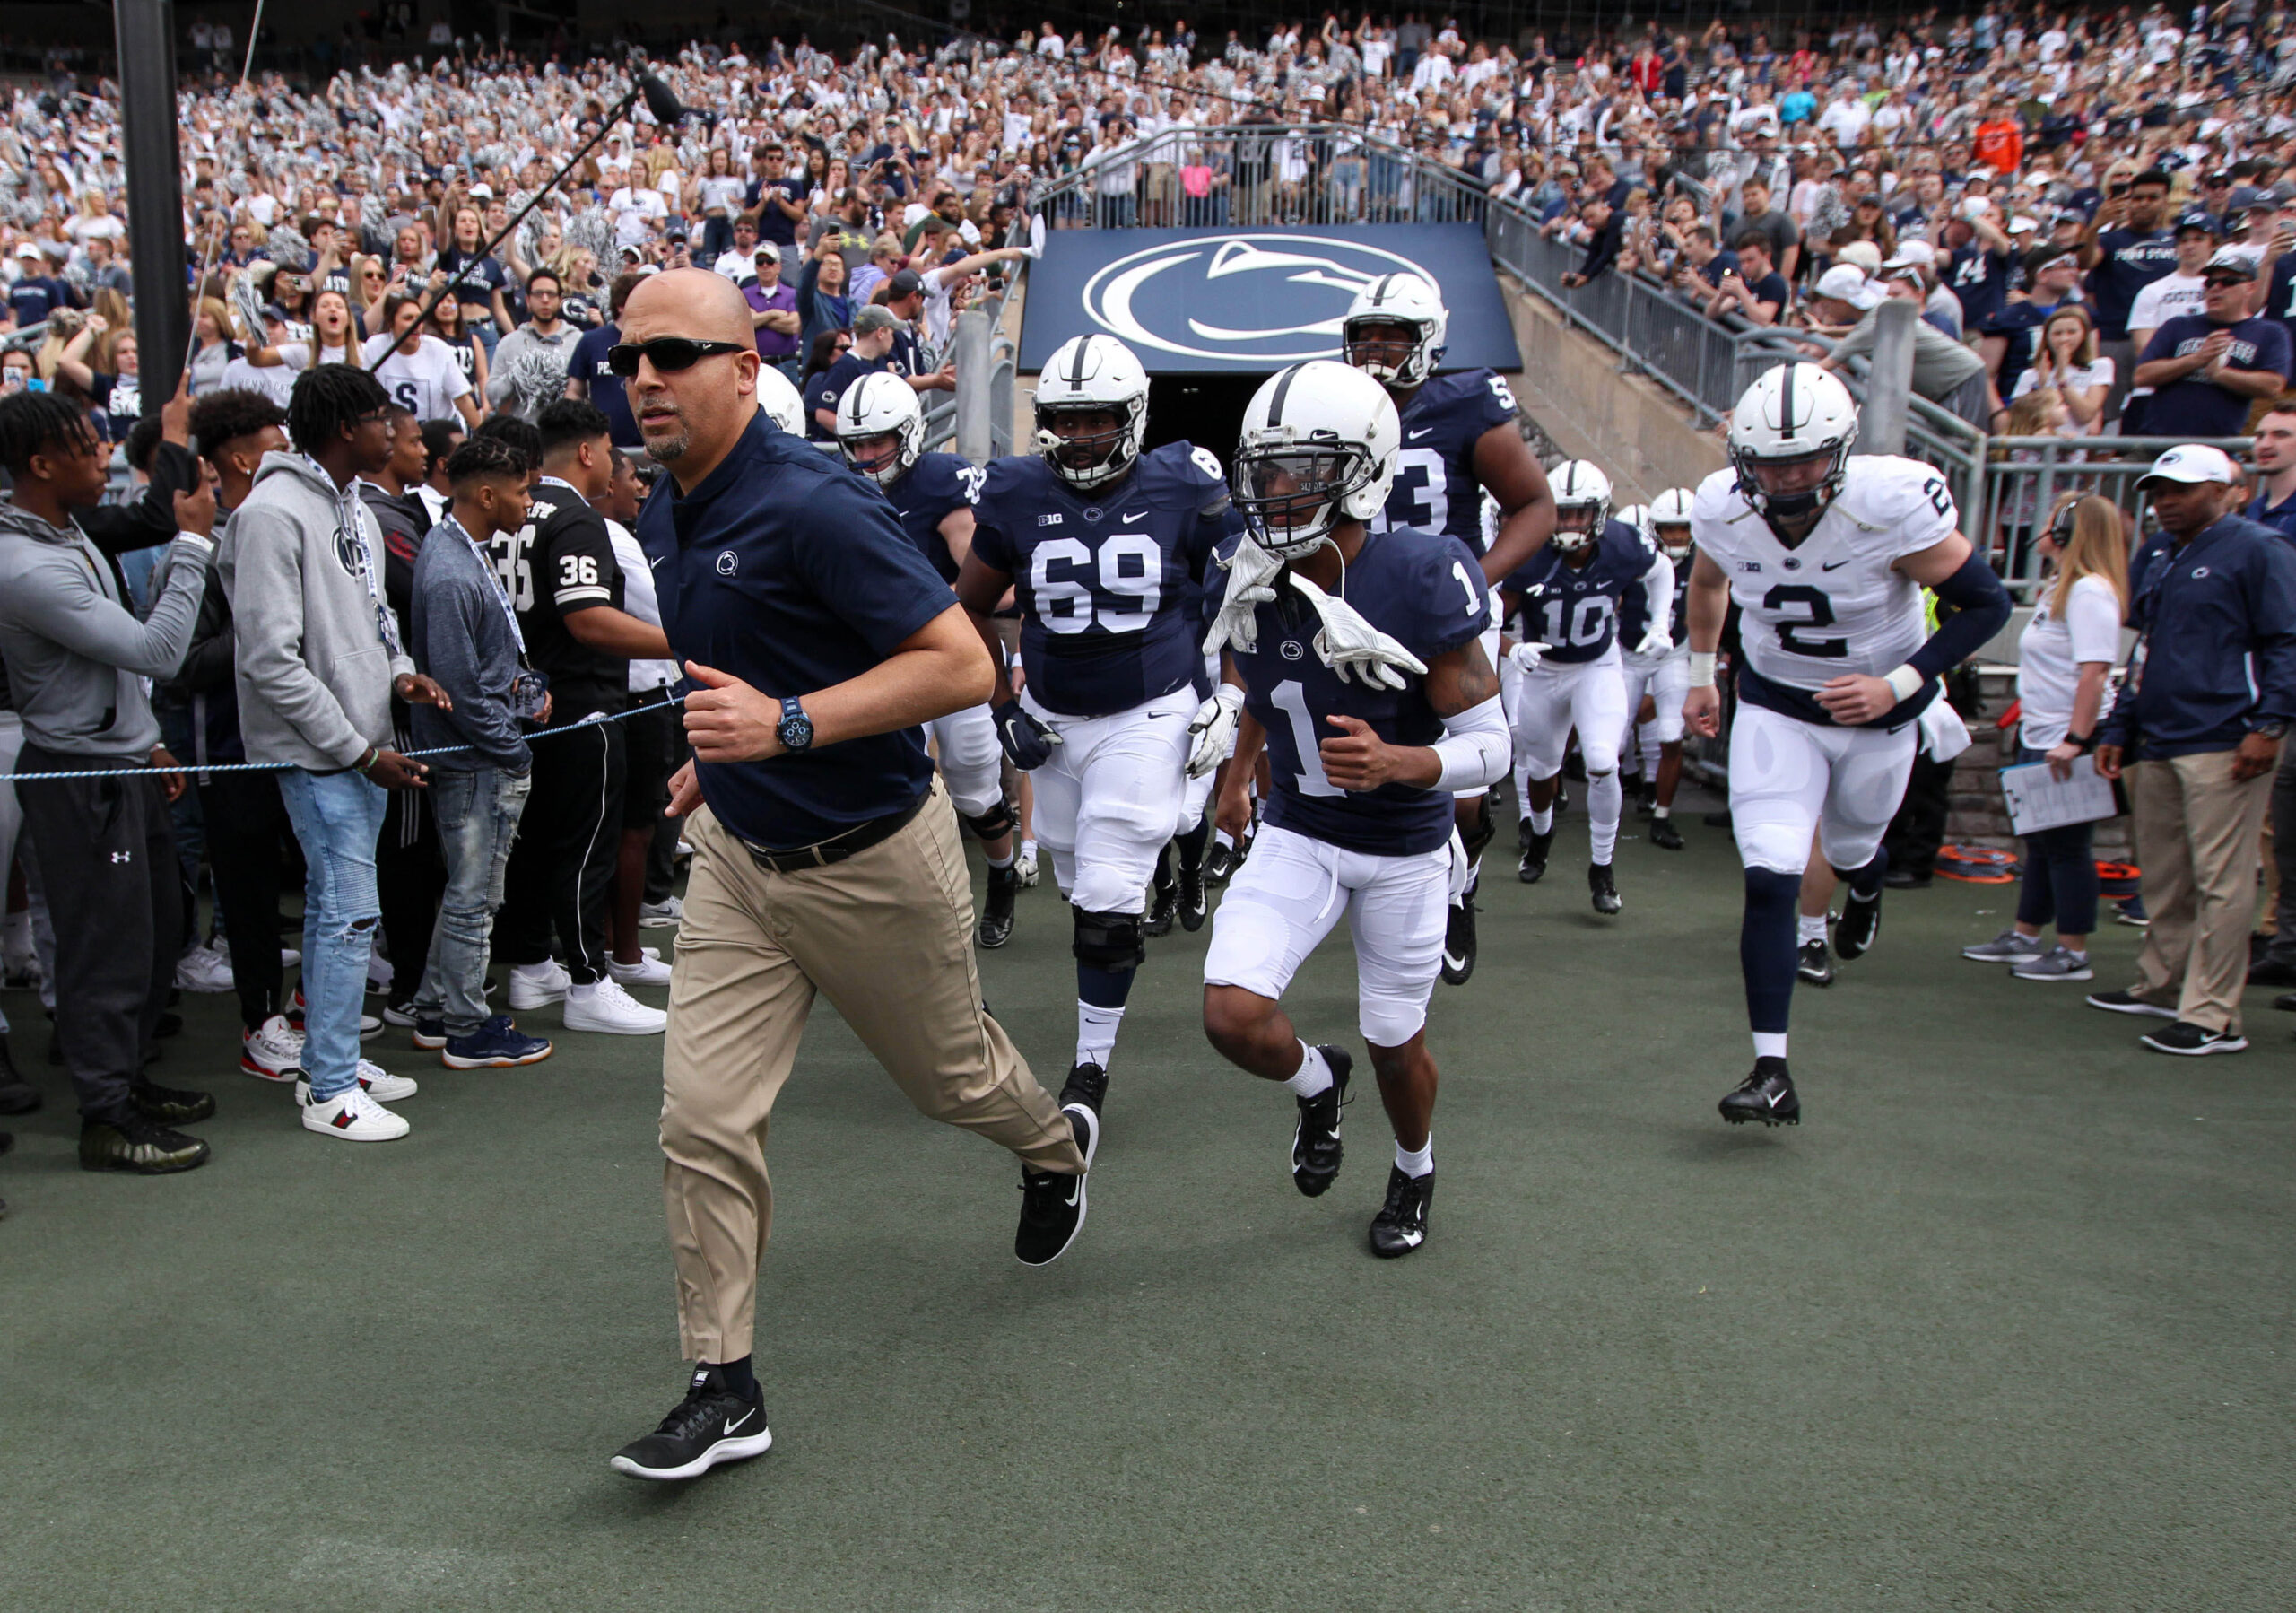 Penn State football: No. 1 player in Maryland